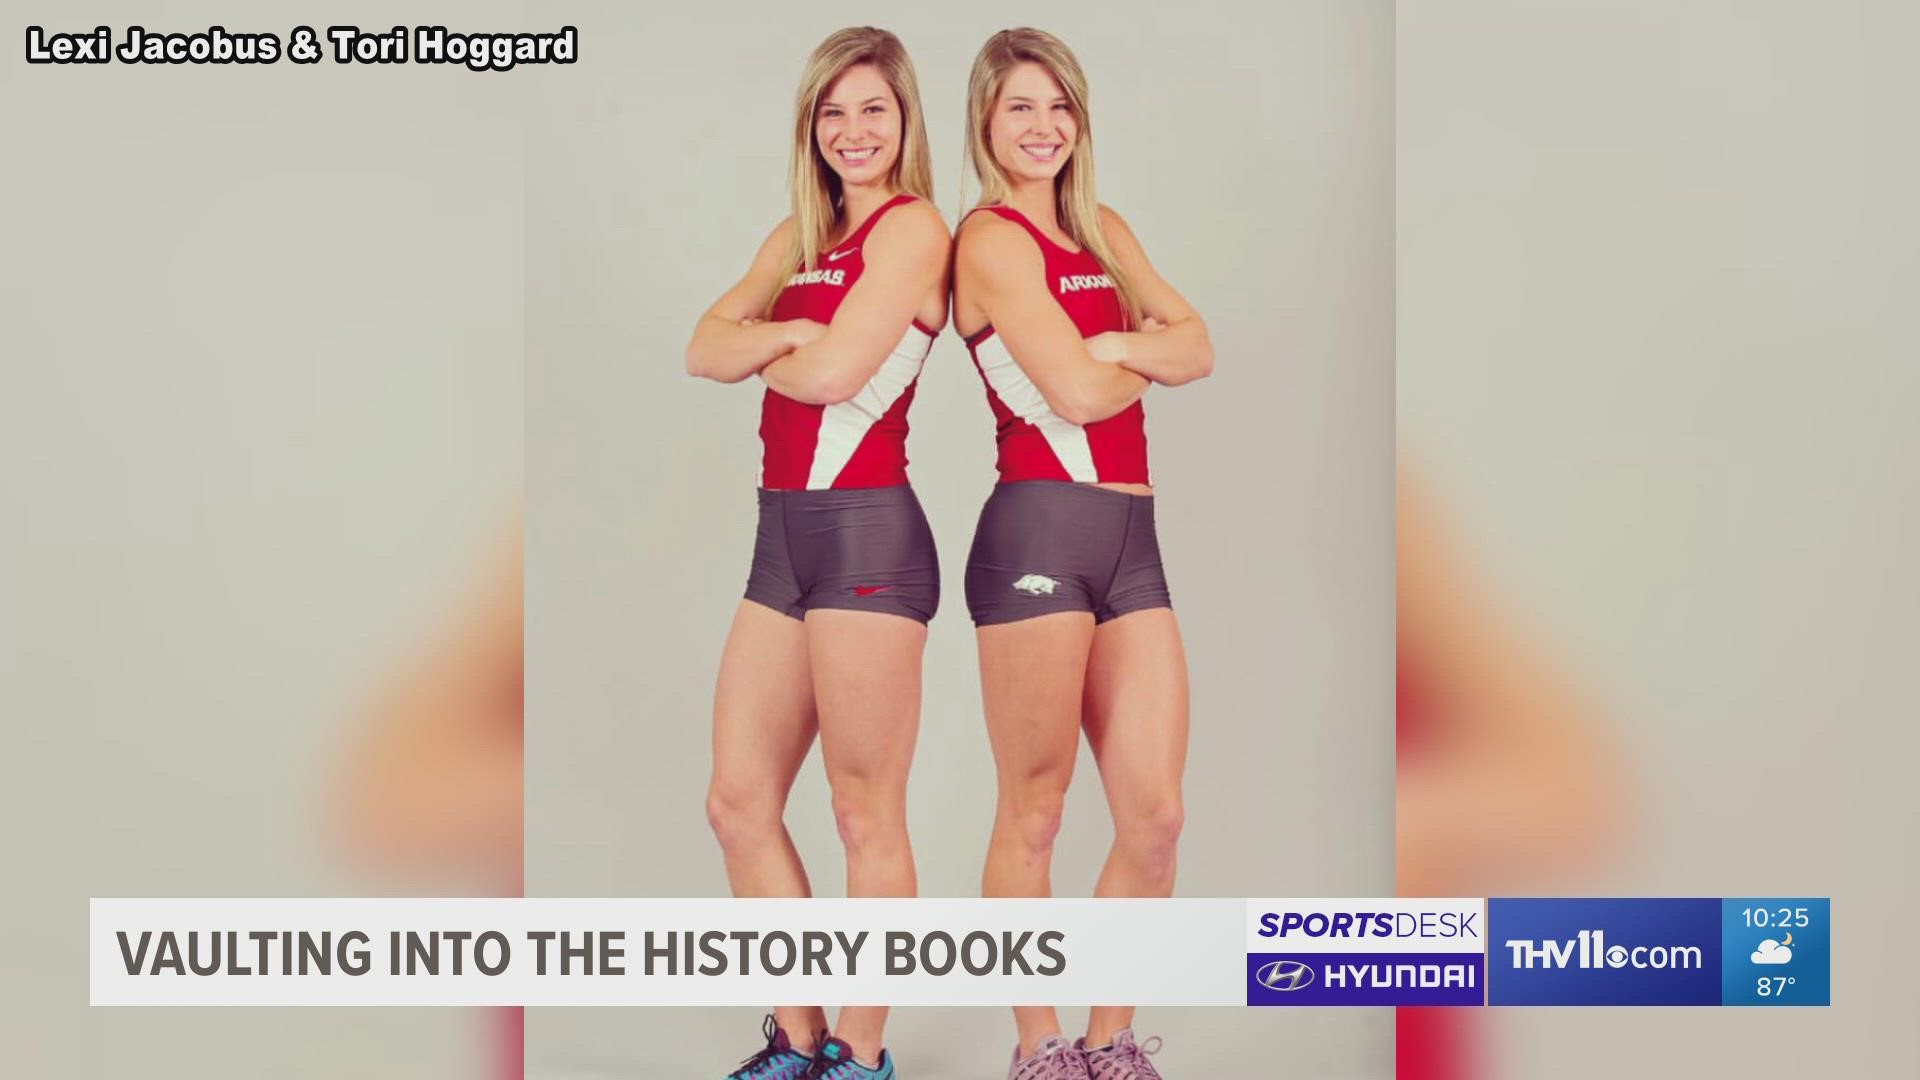 Lexi Jacobus and Tori Hoggard were star pole vaulters in the track and field world, and now they're hoping to be star pharmacists